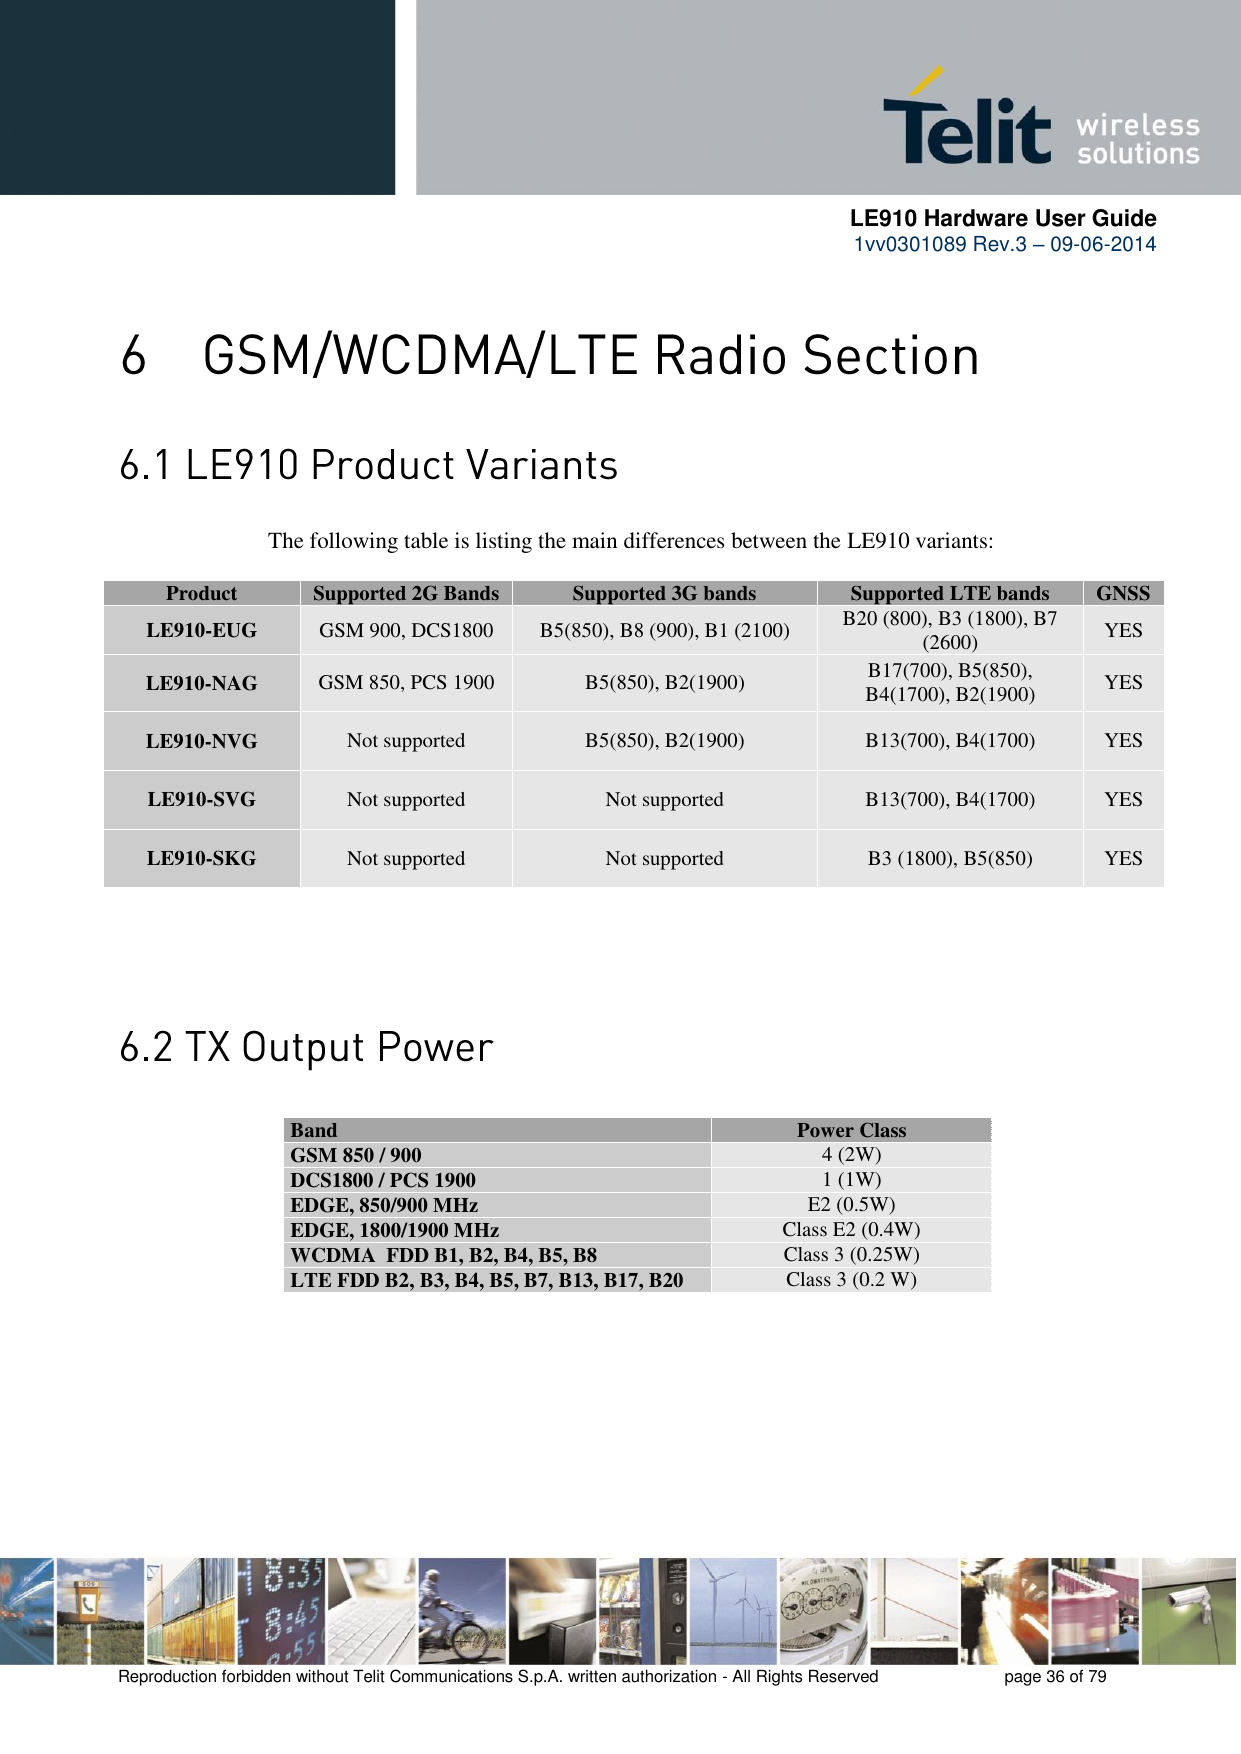      LE910 Hardware User Guide 1vv0301089 Rev.3 – 09-06-2014    Reproduction forbidden without Telit Communications S.p.A. written authorization - All Rights Reserved    page 36 of 79     The following table is listing the main differences between the LE910 variants:  Product Supported 2G Bands Supported 3G bands Supported LTE bands GNSS LE910-EUG GSM 900, DCS1800 B5(850), B8 (900), B1 (2100) B20 (800), B3 (1800), B7 (2600) YES LE910-NAG GSM 850, PCS 1900 B5(850), B2(1900) B17(700), B5(850), B4(1700), B2(1900) YES LE910-NVG Not supported B5(850), B2(1900) B13(700), B4(1700) YES LE910-SVG Not supported Not supported B13(700), B4(1700) YES LE910-SKG Not supported Not supported B3 (1800), B5(850) YES                   Band Power Class GSM 850 / 900 4 (2W) DCS1800 / PCS 1900 1 (1W) EDGE, 850/900 MHz E2 (0.5W) EDGE, 1800/1900 MHz Class E2 (0.4W) WCDMA  FDD B1, B2, B4, B5, B8 Class 3 (0.25W) LTE FDD B2, B3, B4, B5, B7, B13, B17, B20 Class 3 (0.2 W) 